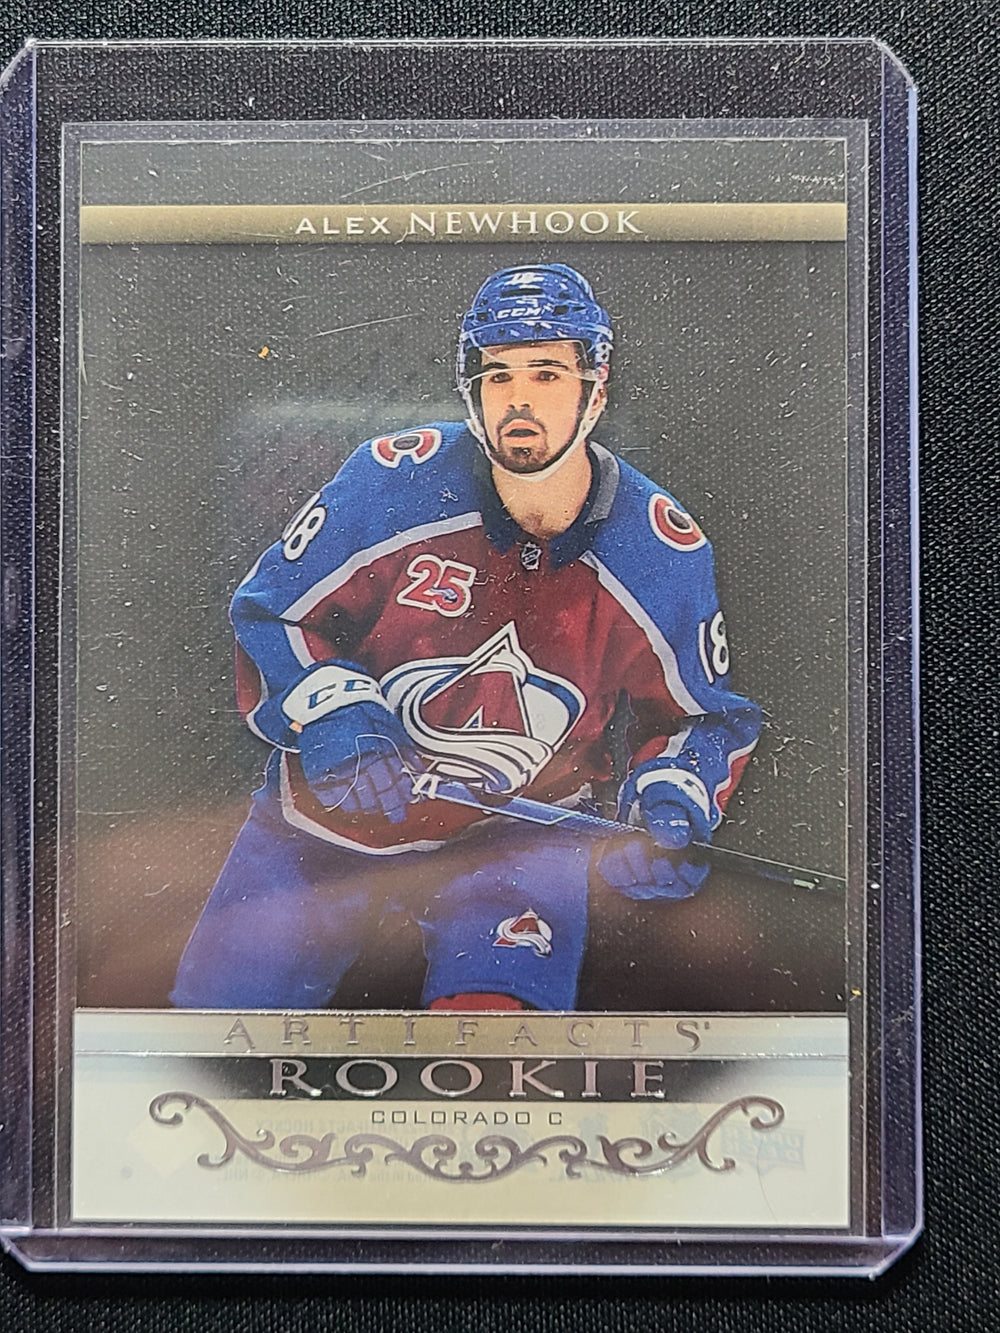 2021-22 Artifacts Rookies Clear Cut Acetate #169 Alex Newhook Colorado Avalanche